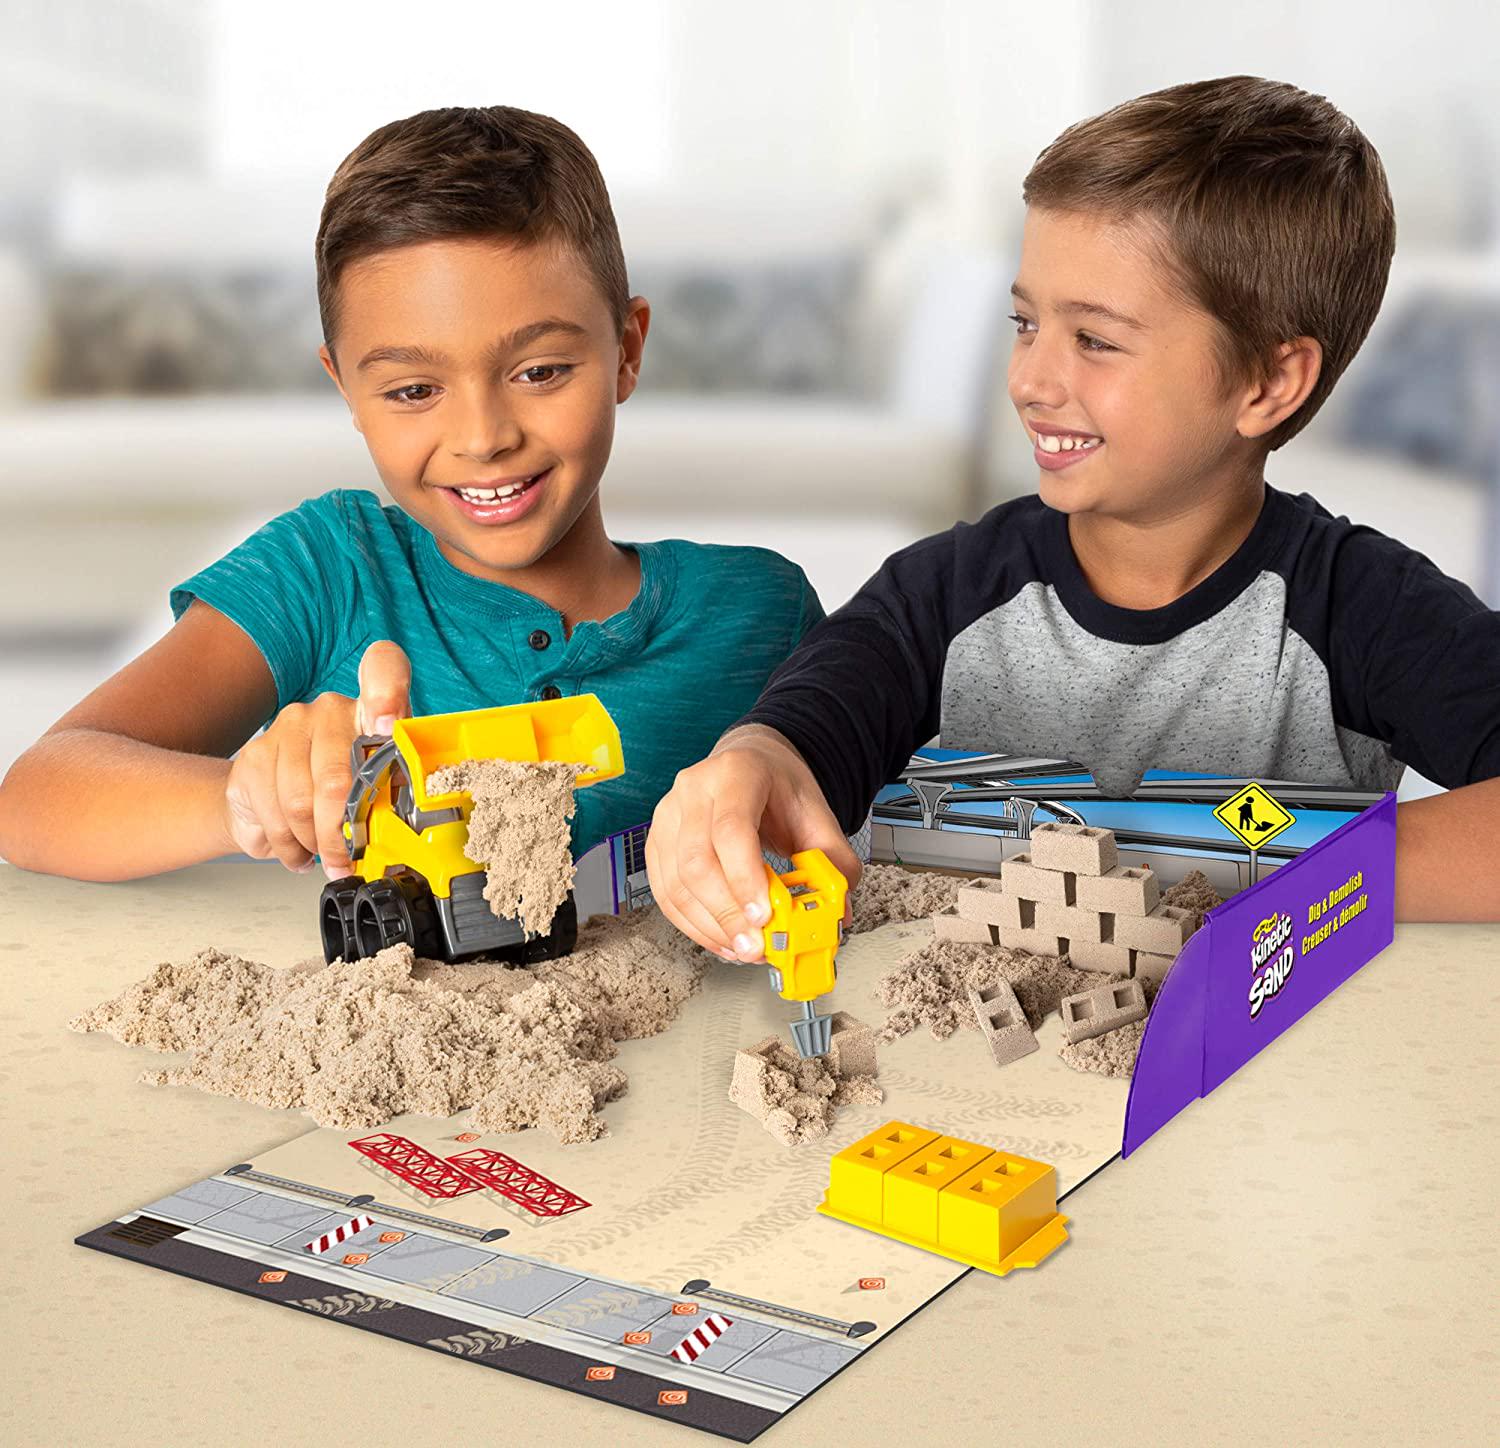 Kinetic Sand, Kinetic Sand, Dig and Demolish Truck Playset with 453 g of Kinetic Sand, for Kids Aged 3 and Up Multicolor